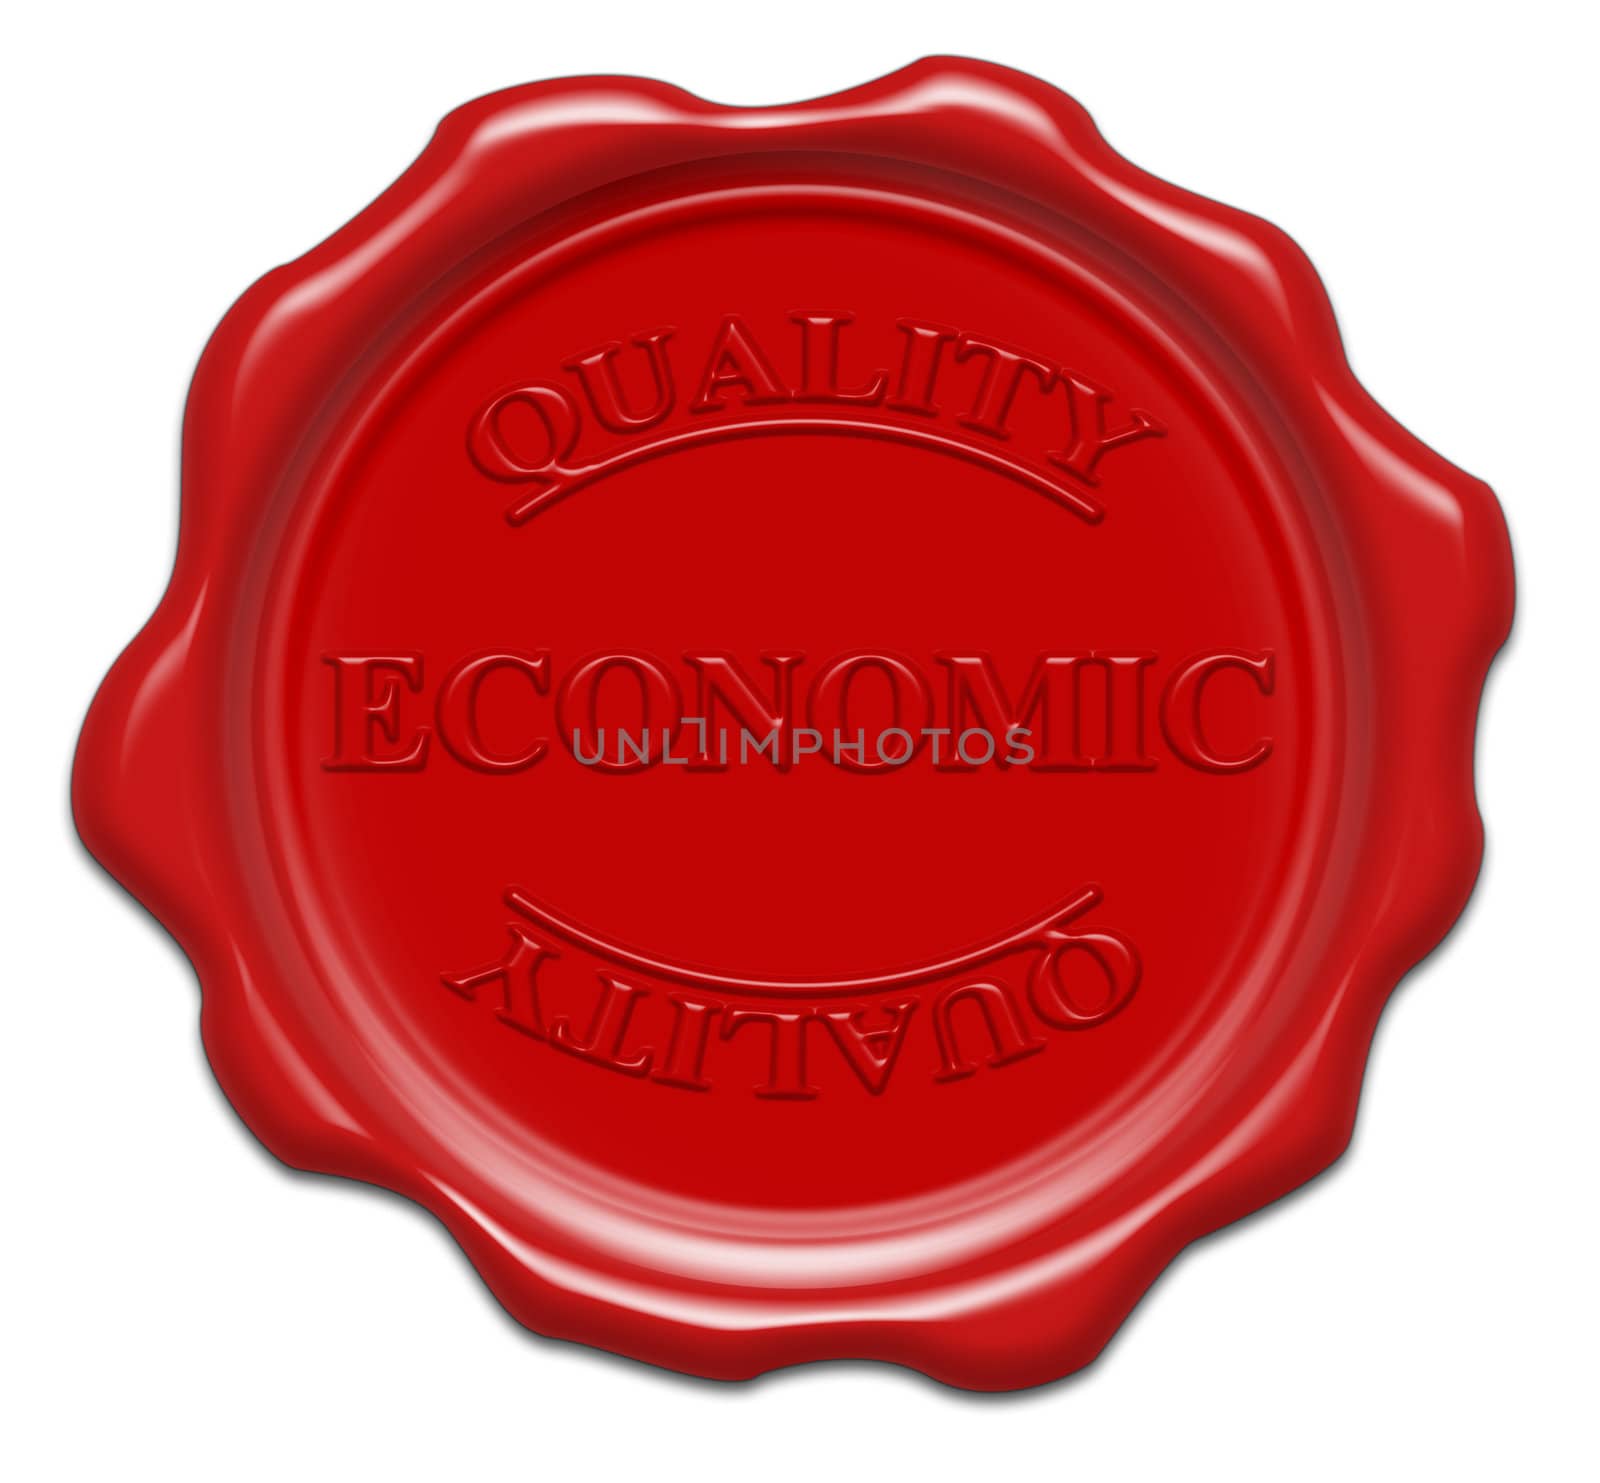 quality economic - illustration red wax seal isolated on white background with word : economic